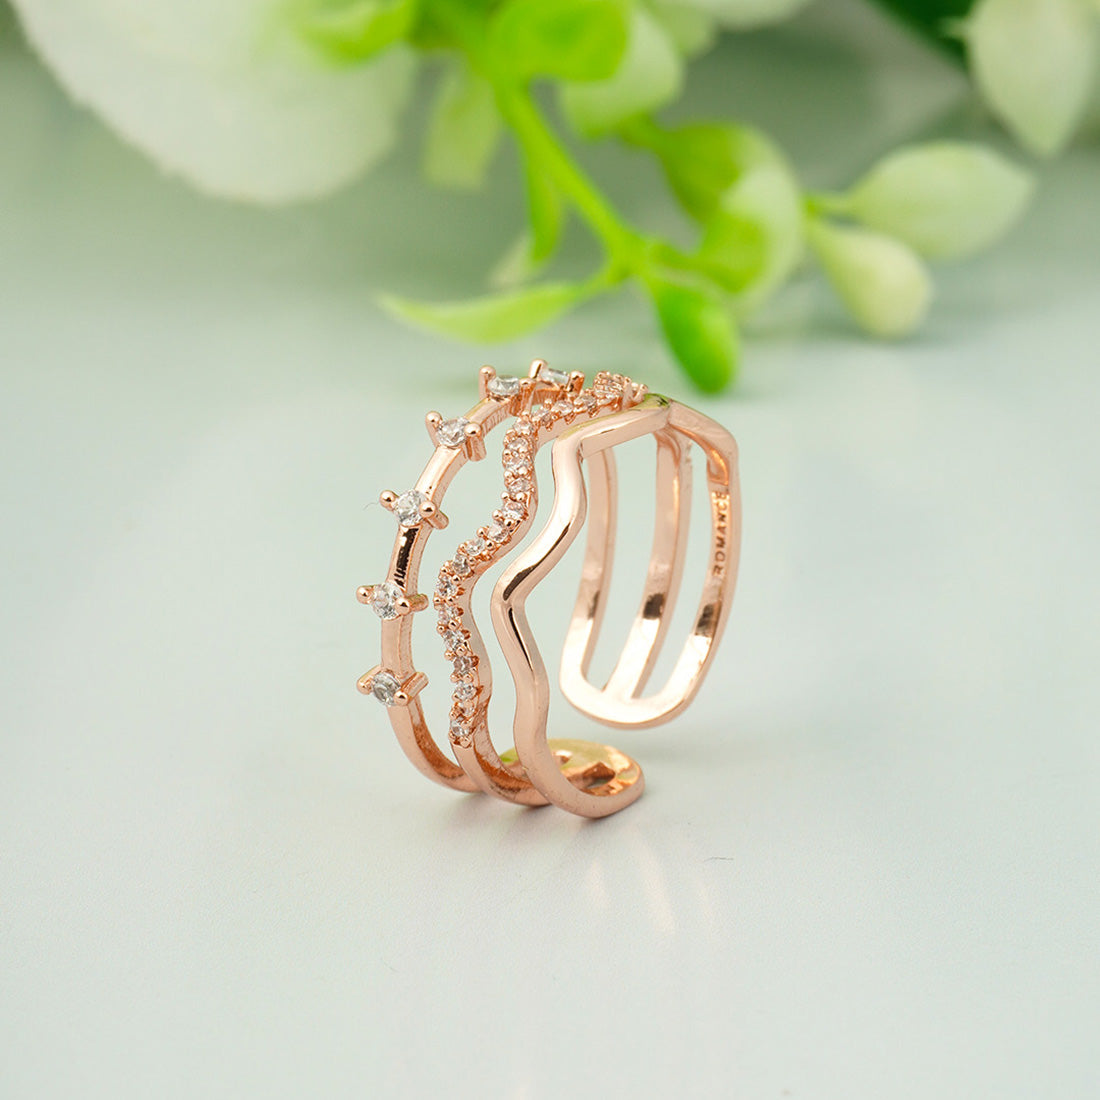 Crystal Studded Rose Gold Layered Ring